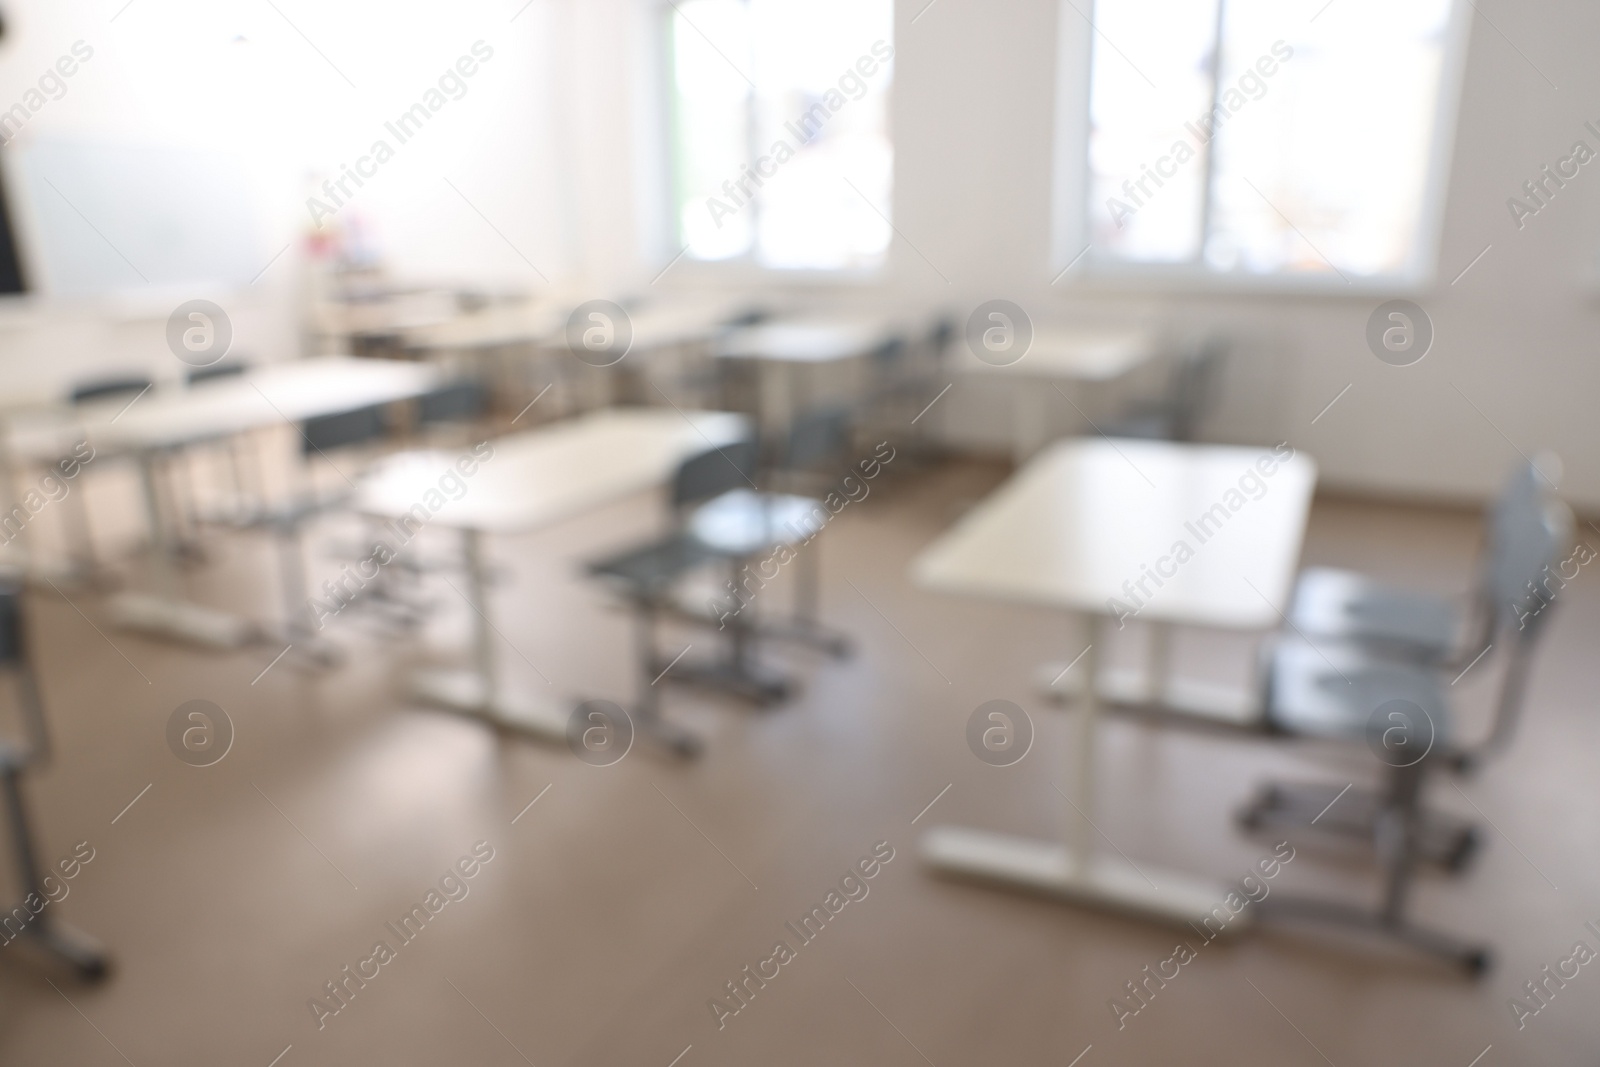 Photo of Blurred view of empty school classroom with desks, windows and chairs